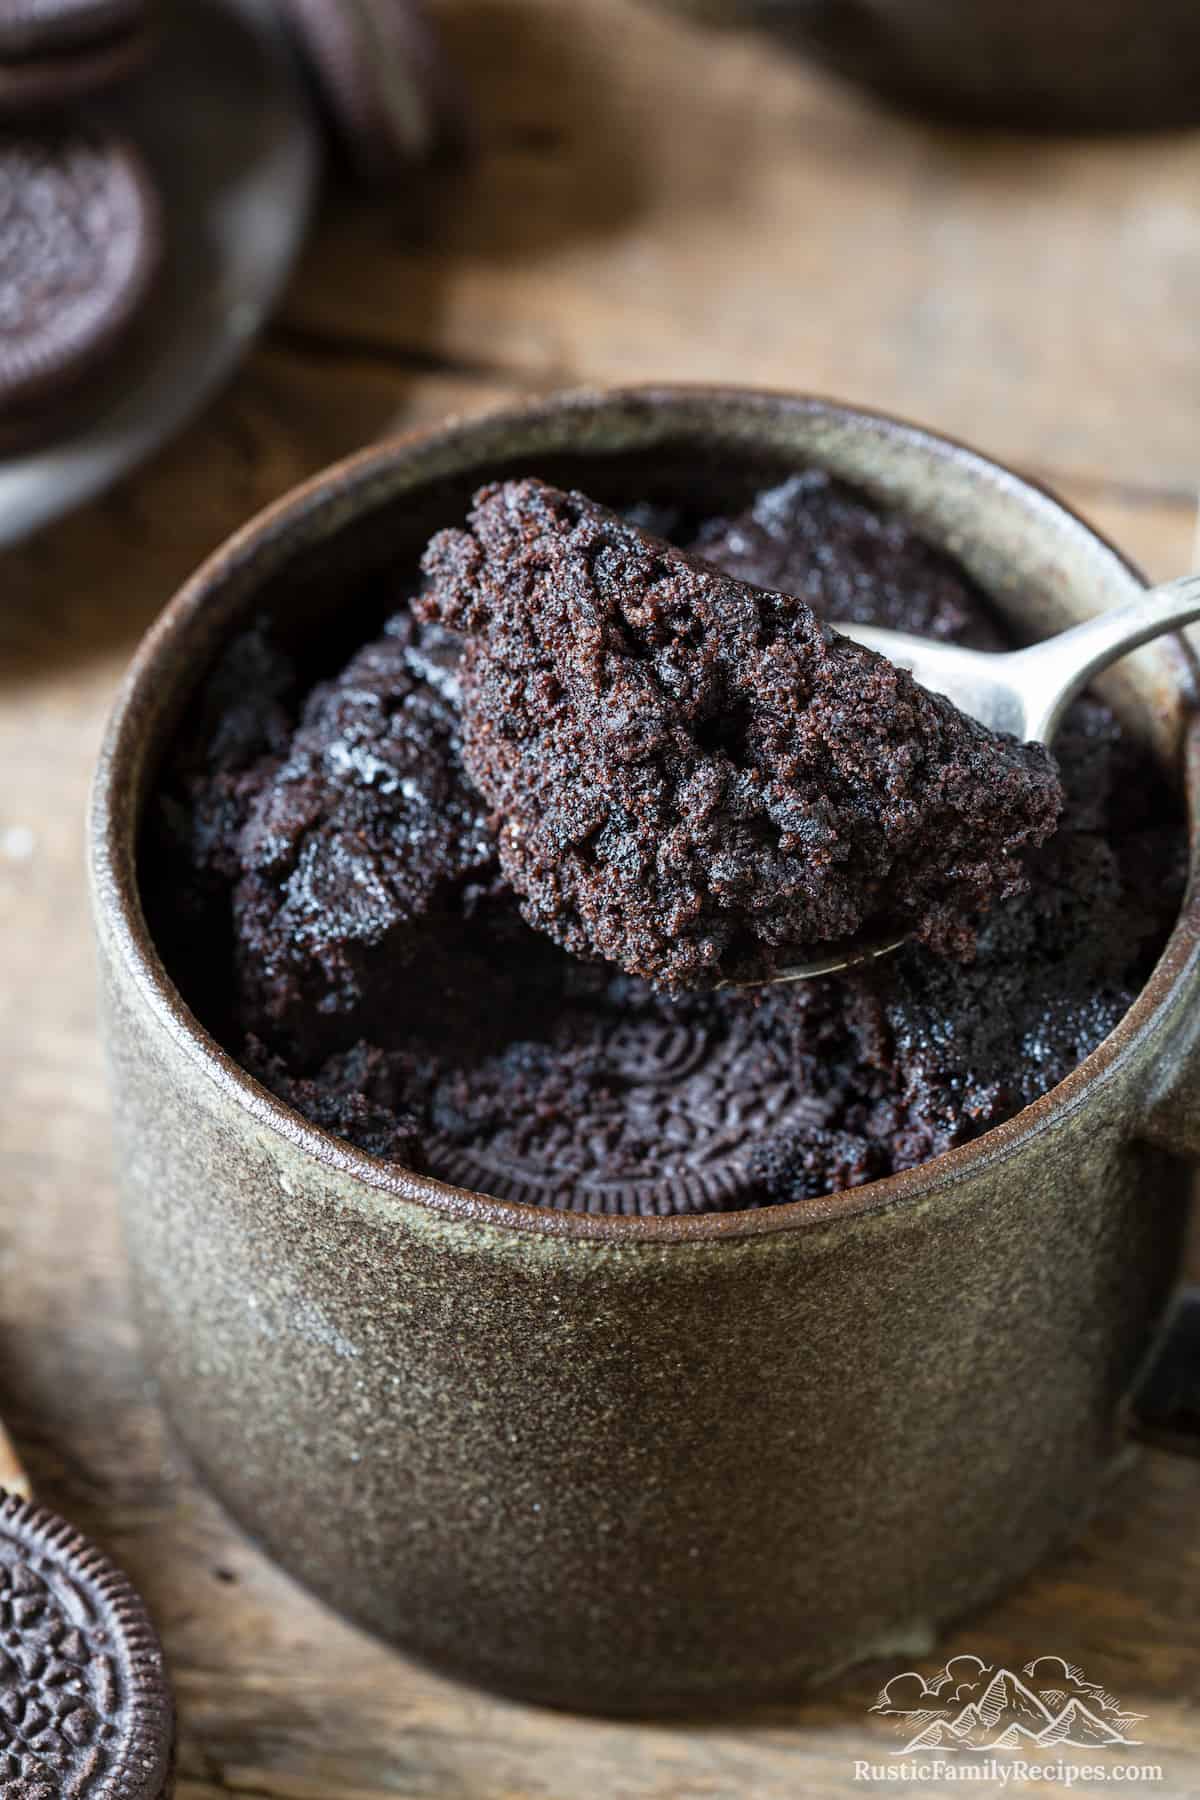 Oreo mug cake with a spoon taking a scoop out